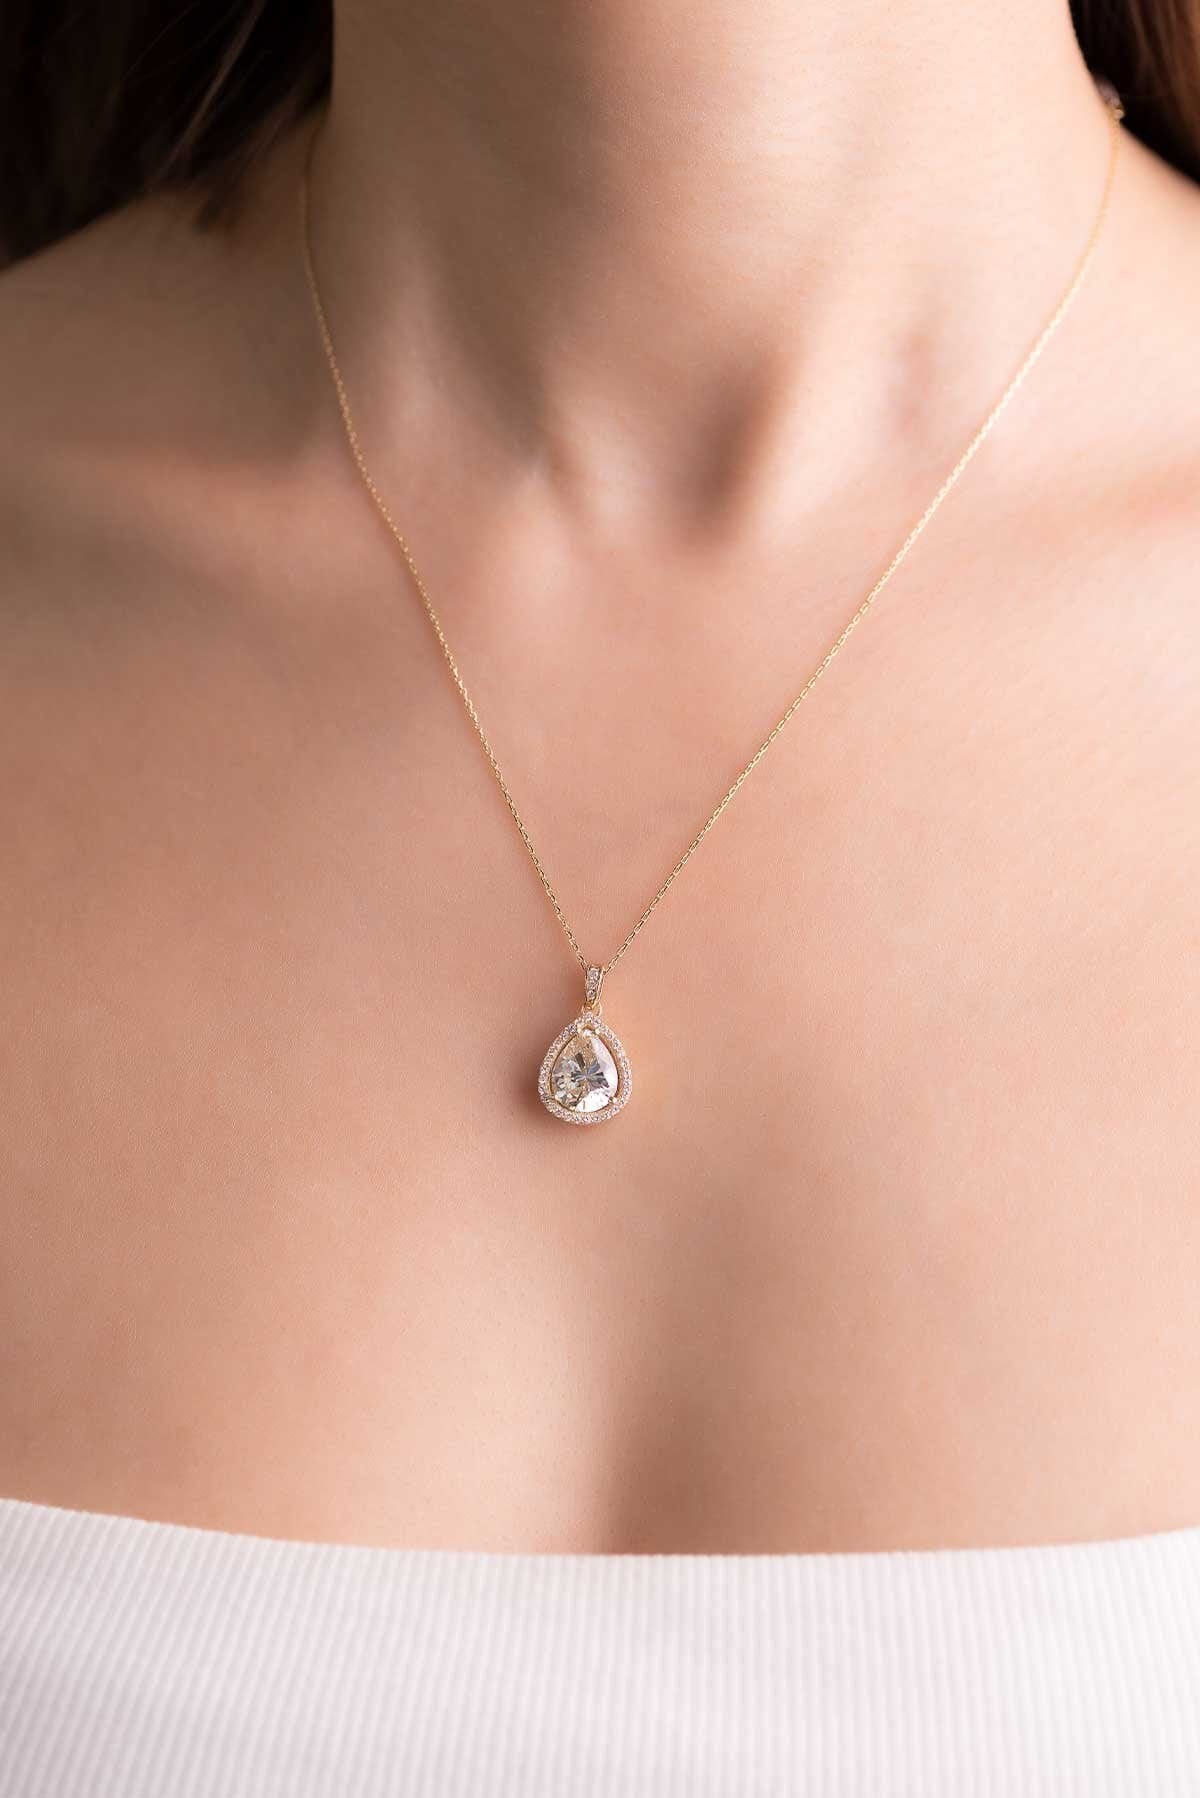 14 K White Gold Certified Gold Premium Created Stone Drop Solitaire Necklace SoChic